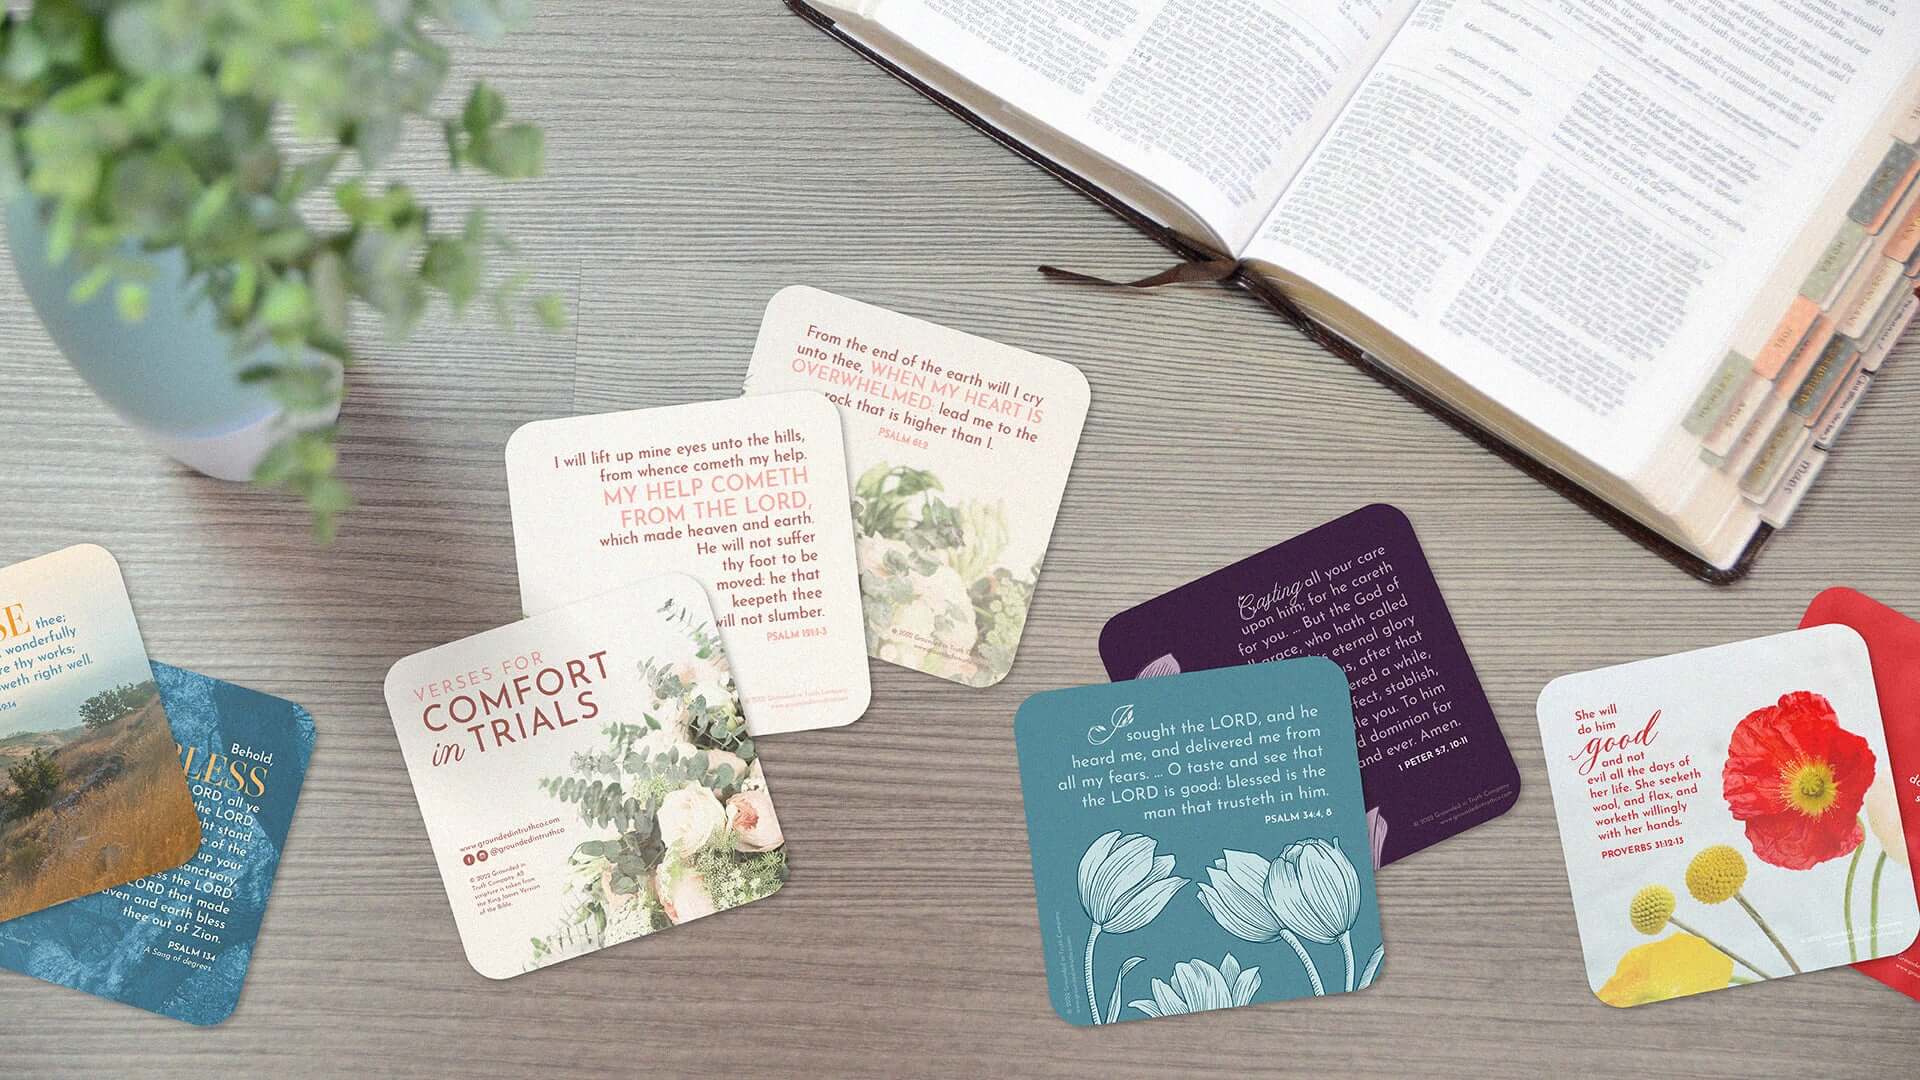 bible verse study cards on table with greenery and bible